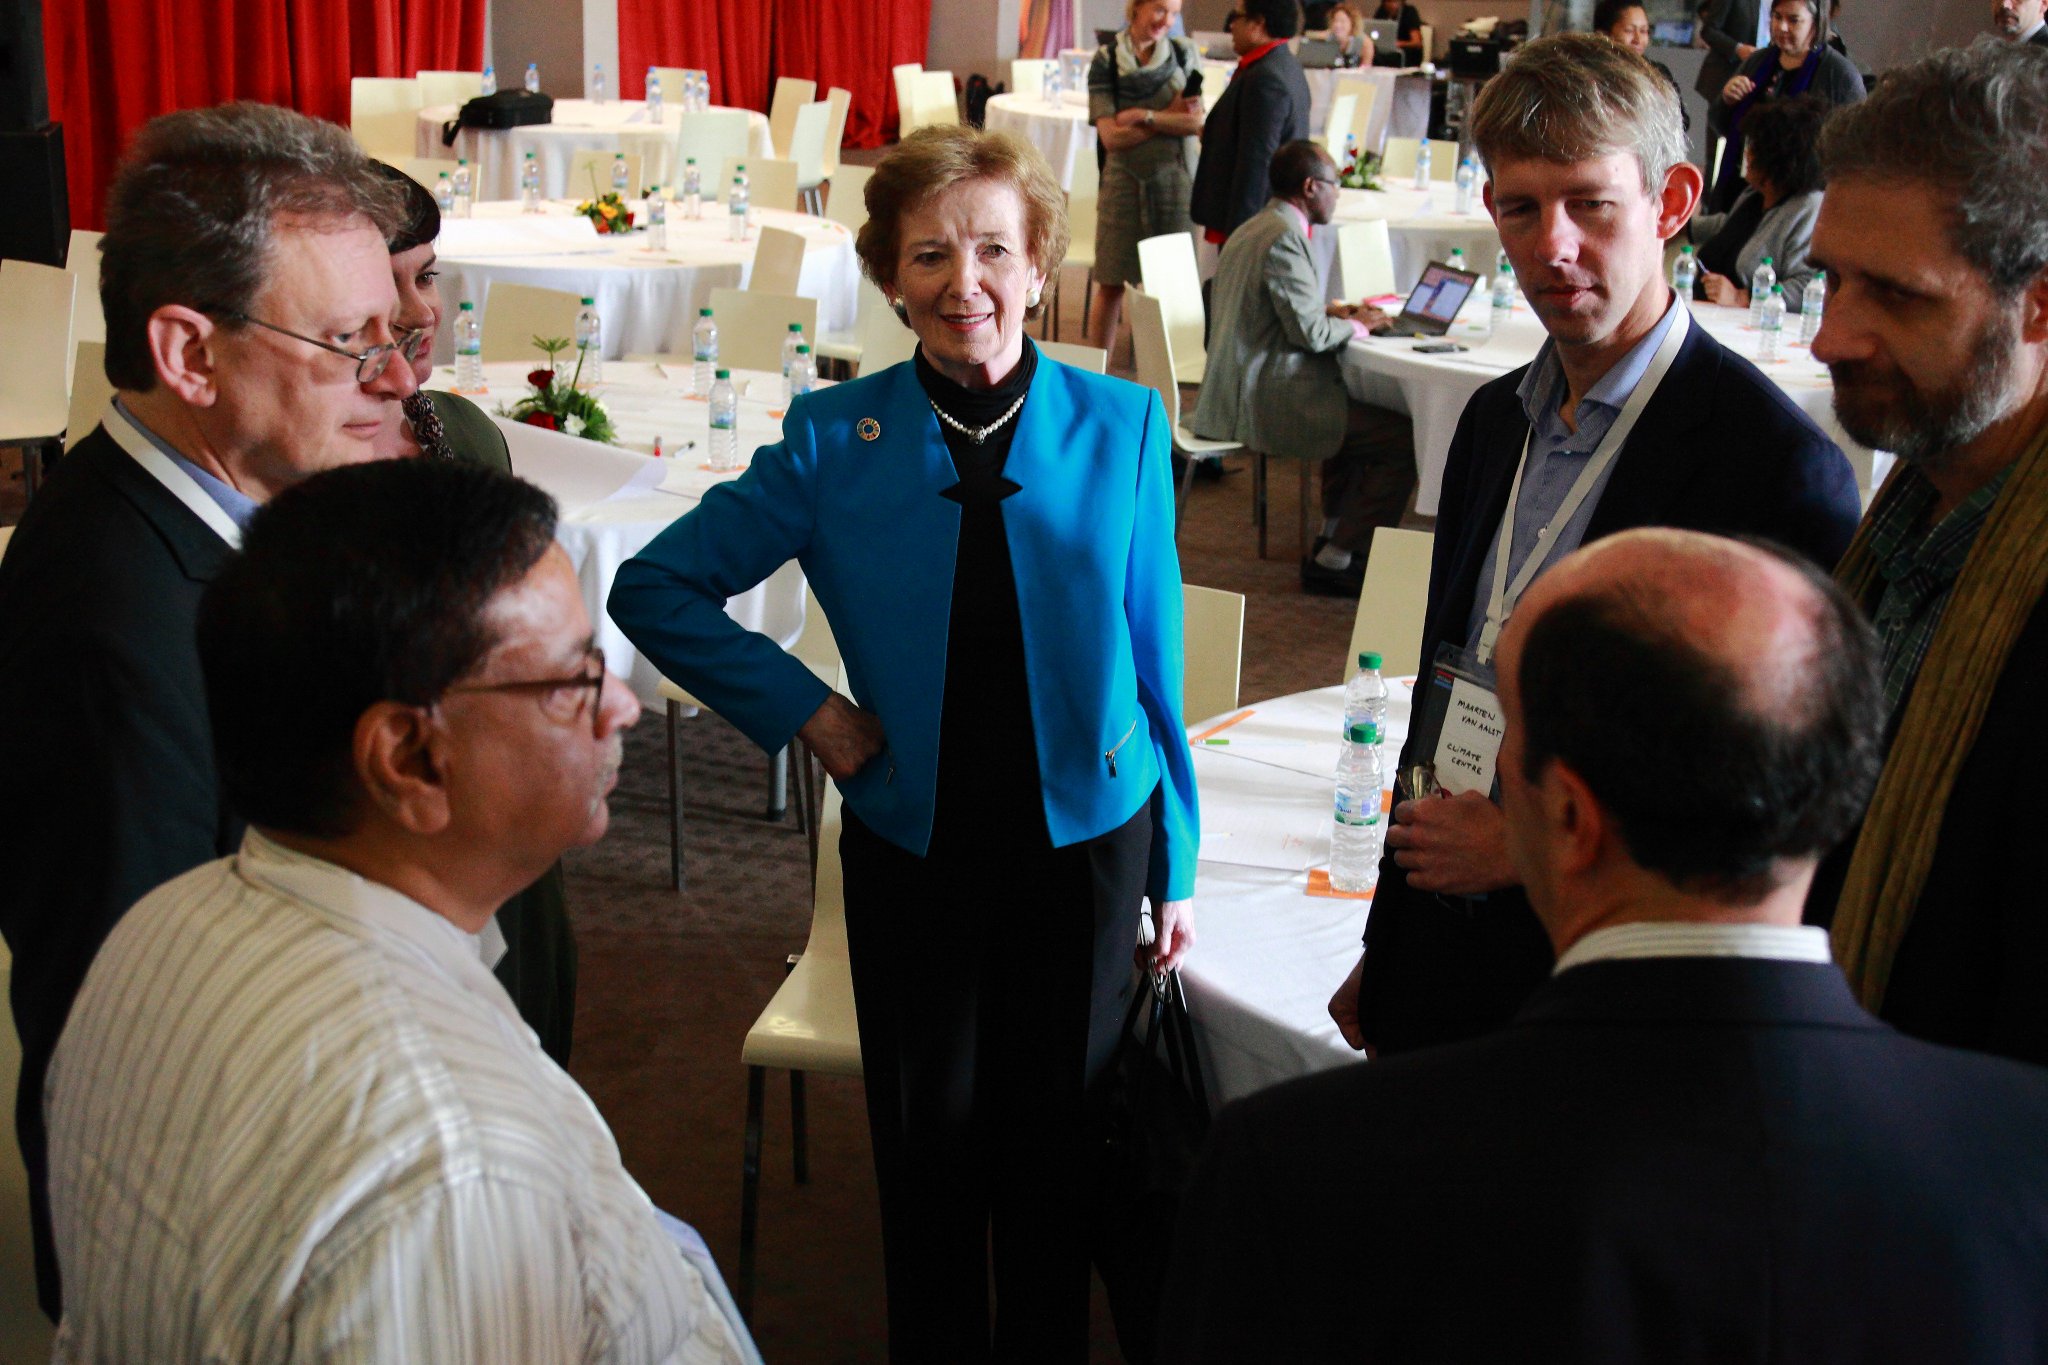 Mary Robinson @MRFCJ arrives for second day of #DCdays... https://t.co/G982pJFDRn